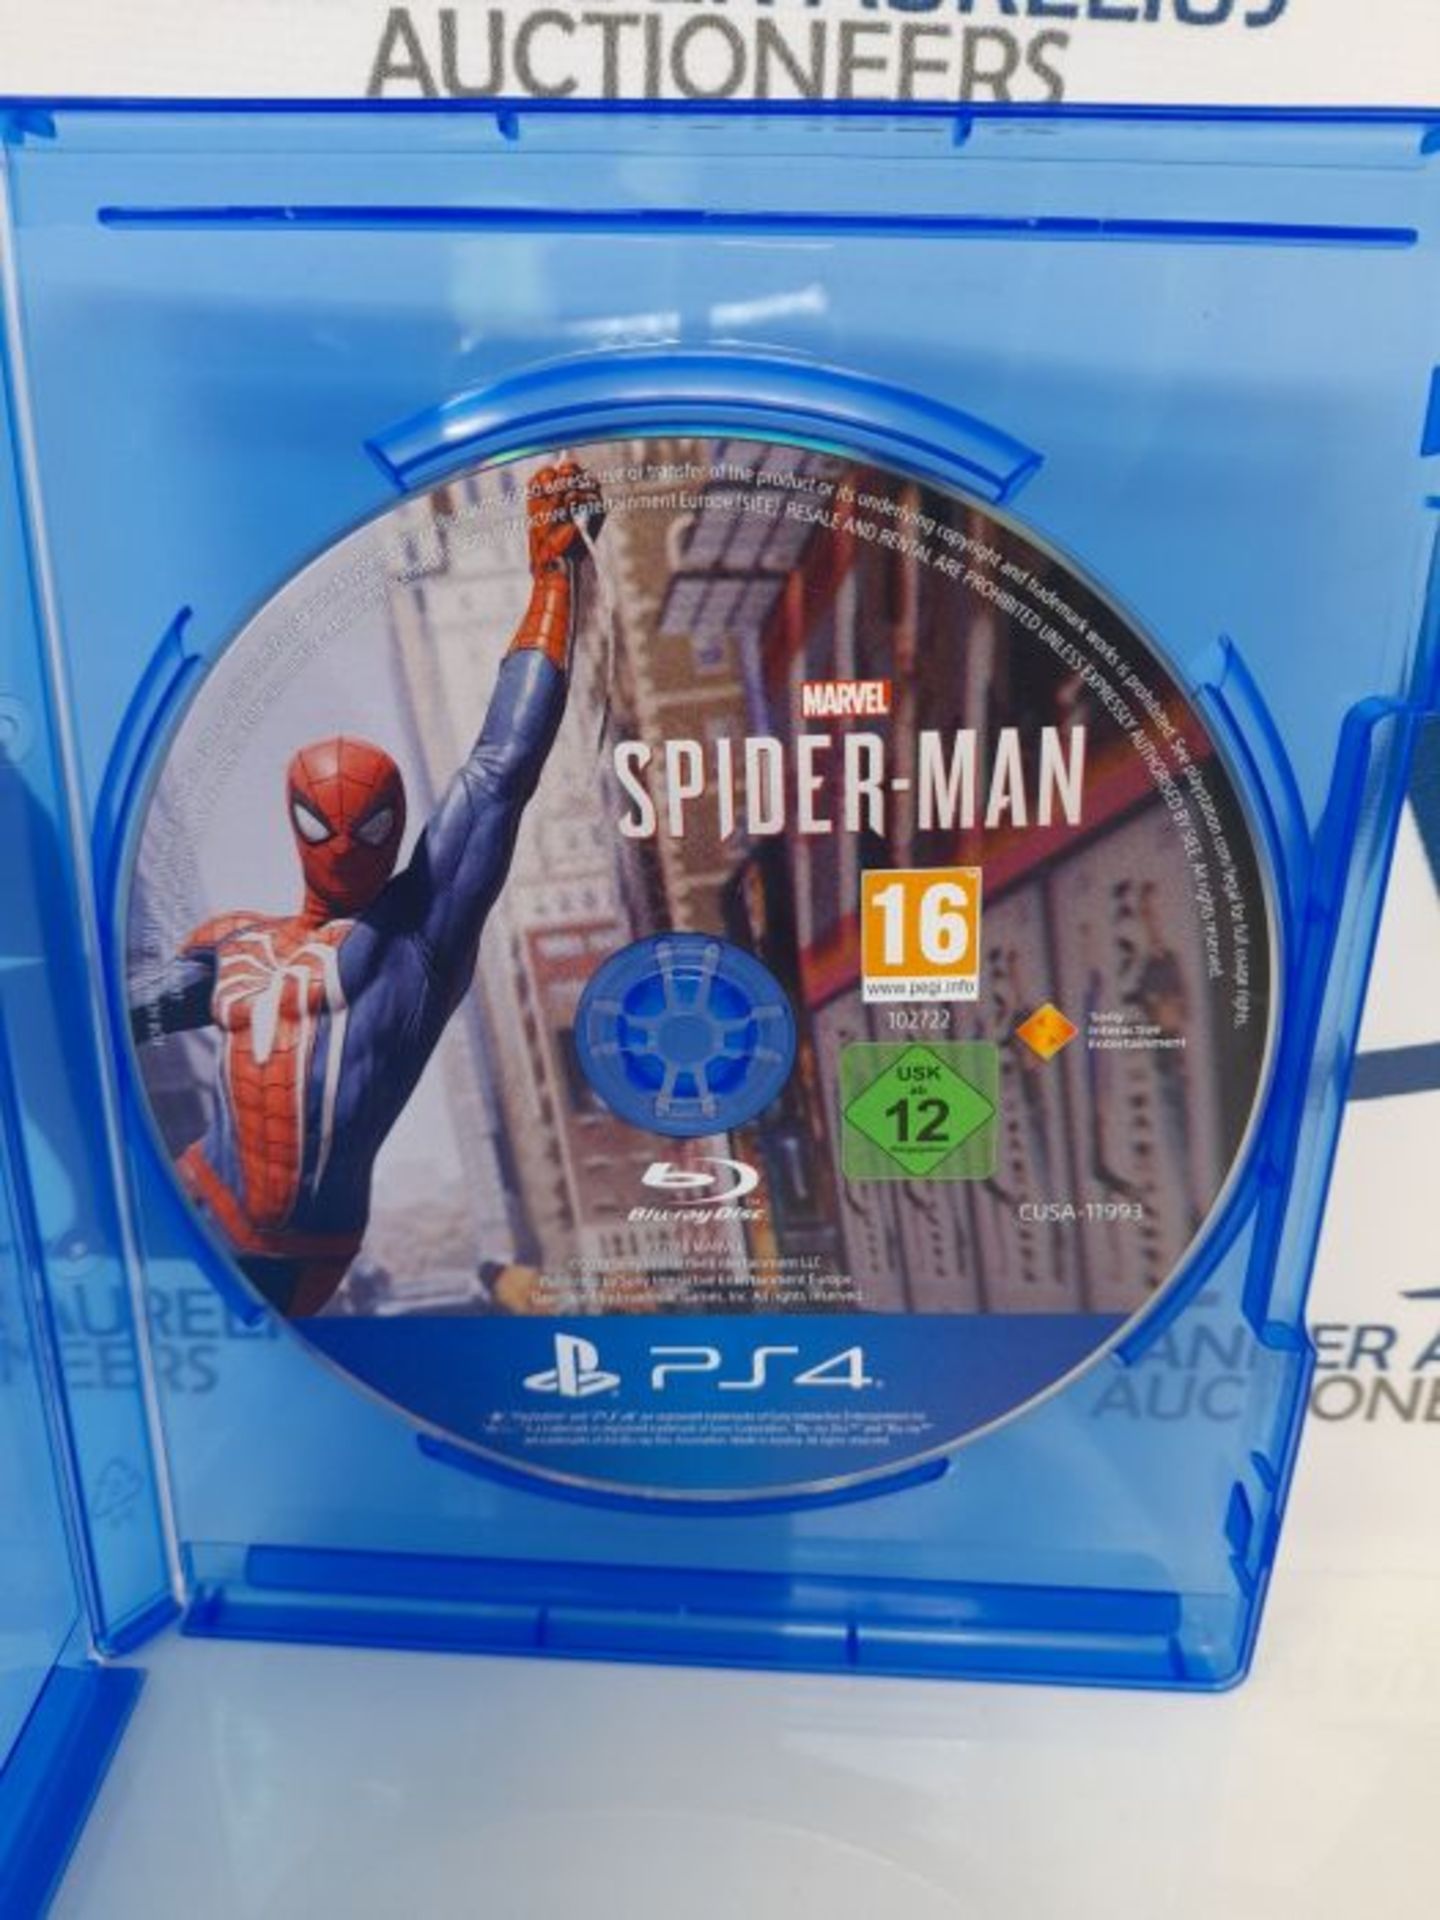 RRP £59.00 Marvelâ¬ "!s Spider-Man - Standard Edition - [PlayStation 4] - Image 3 of 3